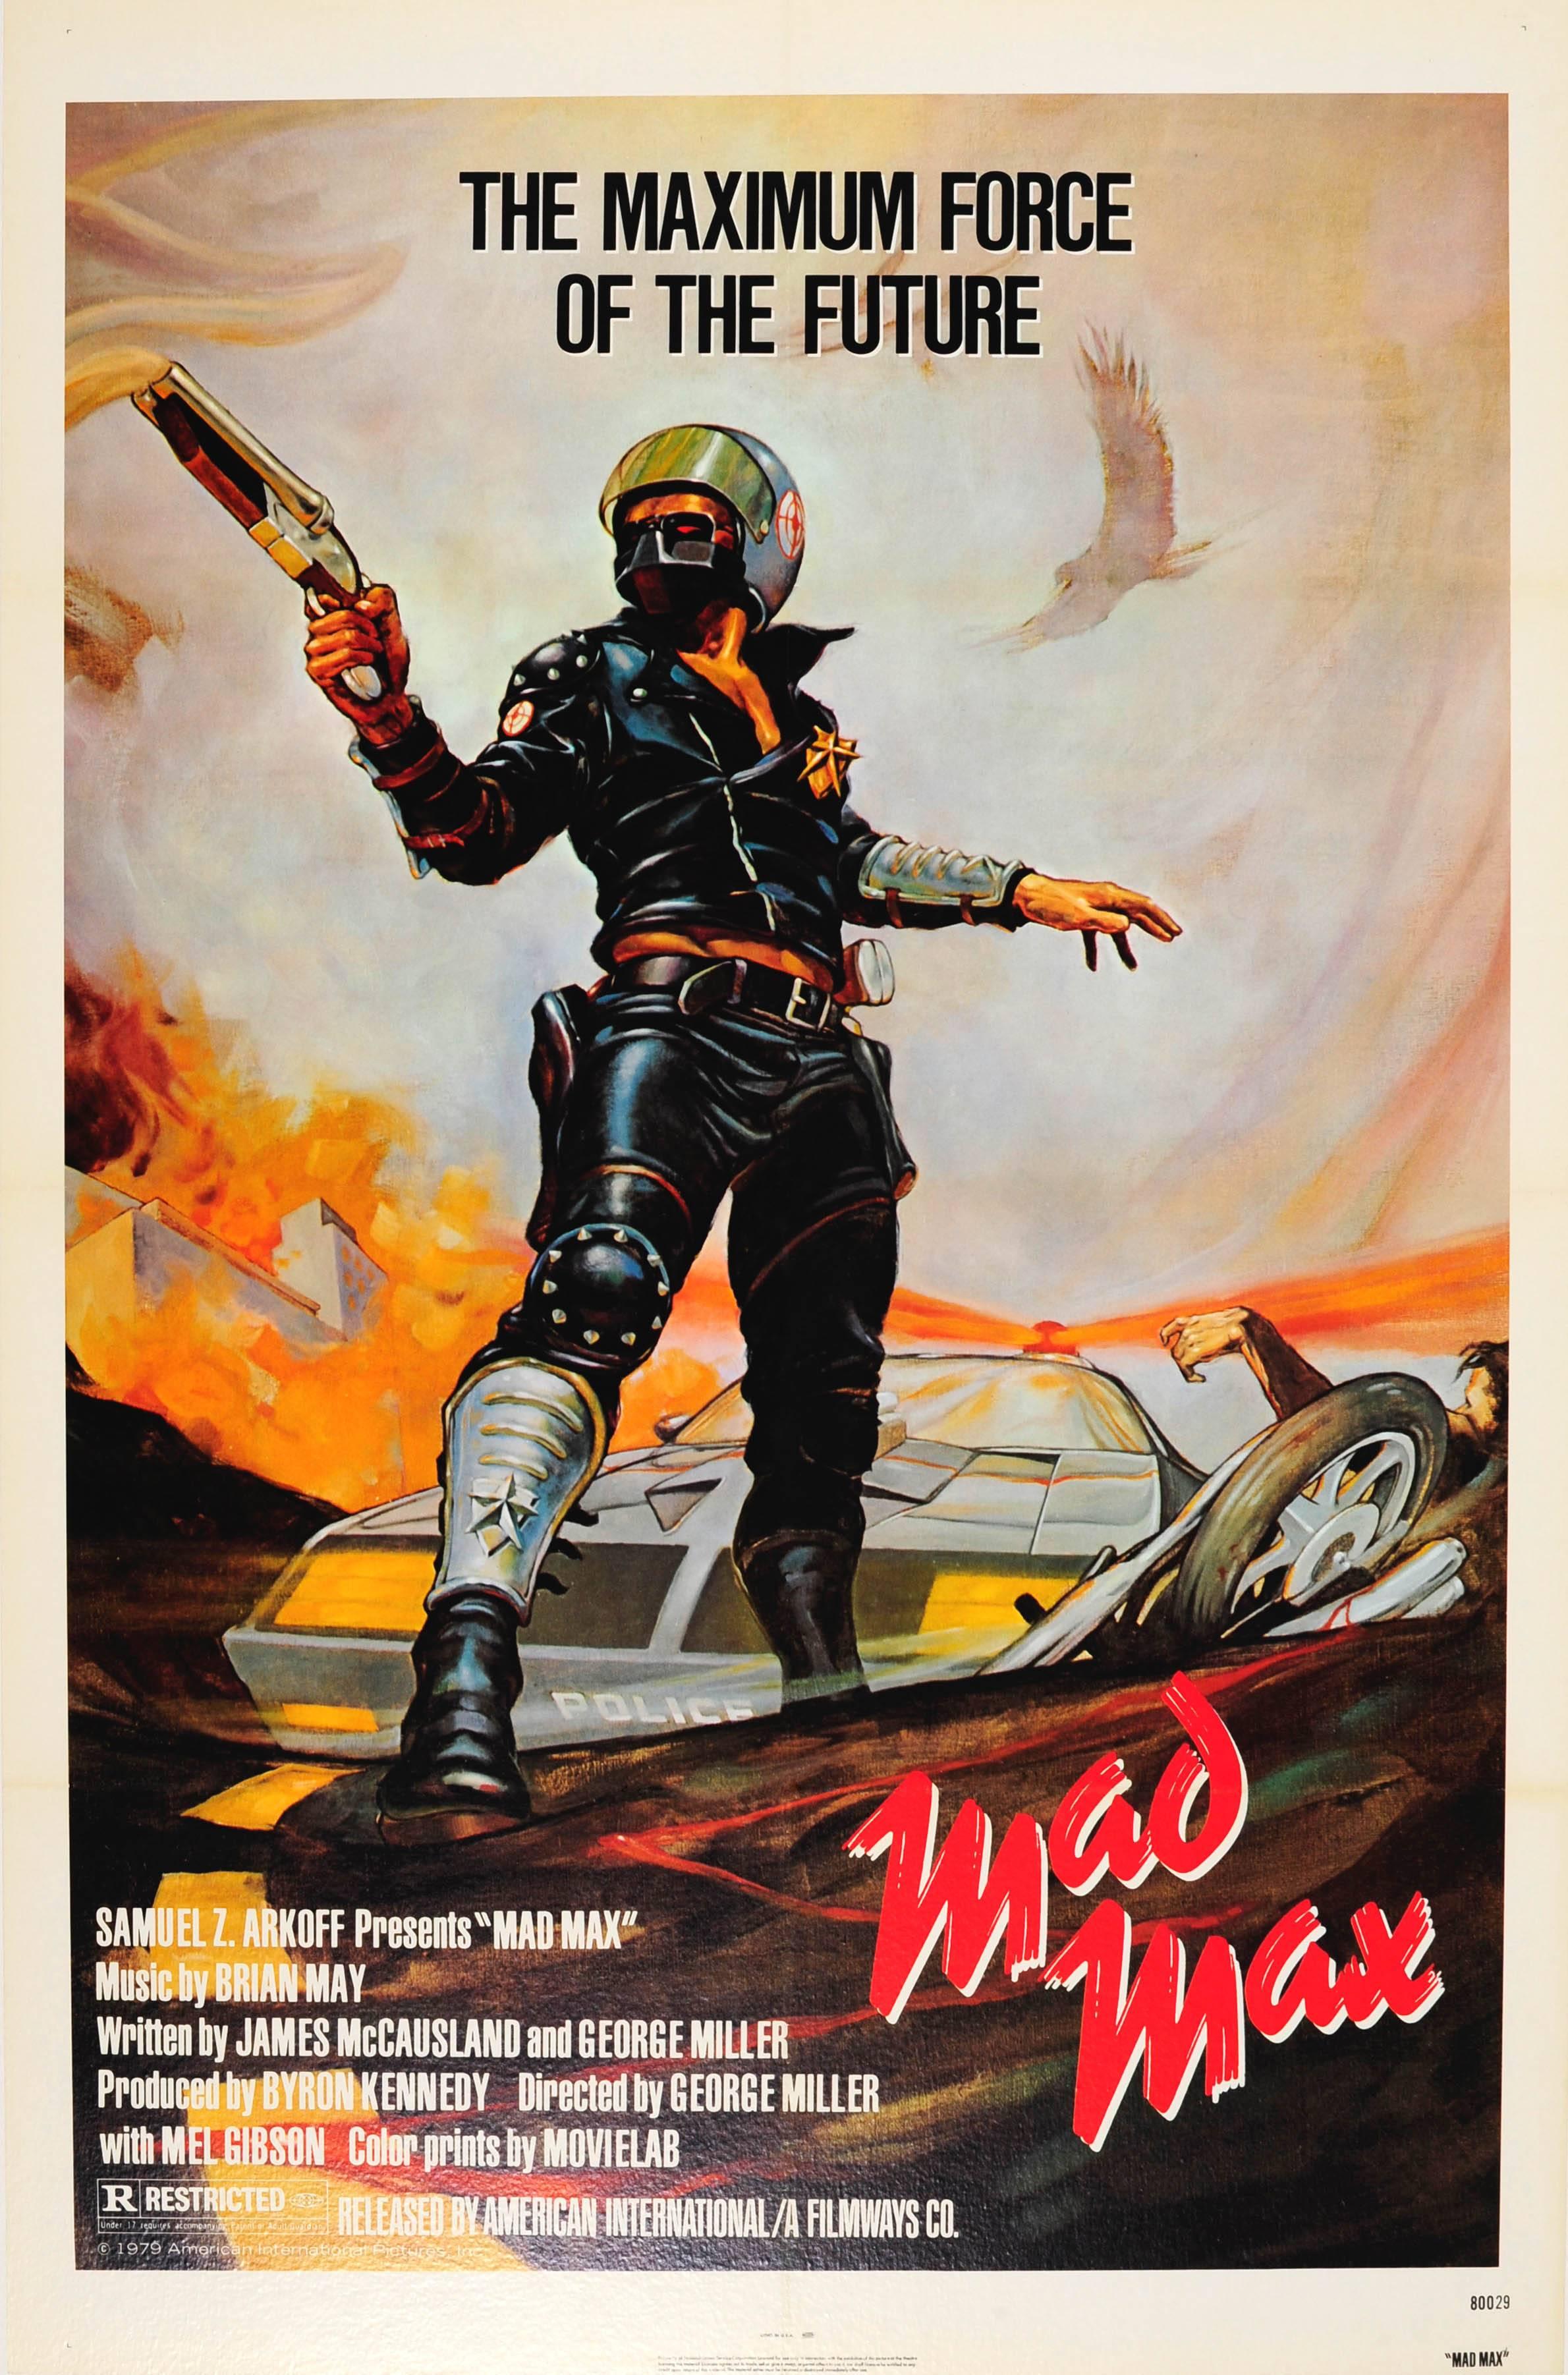 Bill Garland Print - Original Vintage Sci-Fi Movie Poster - Mad Max - Mel Gibson & Music By Brian May